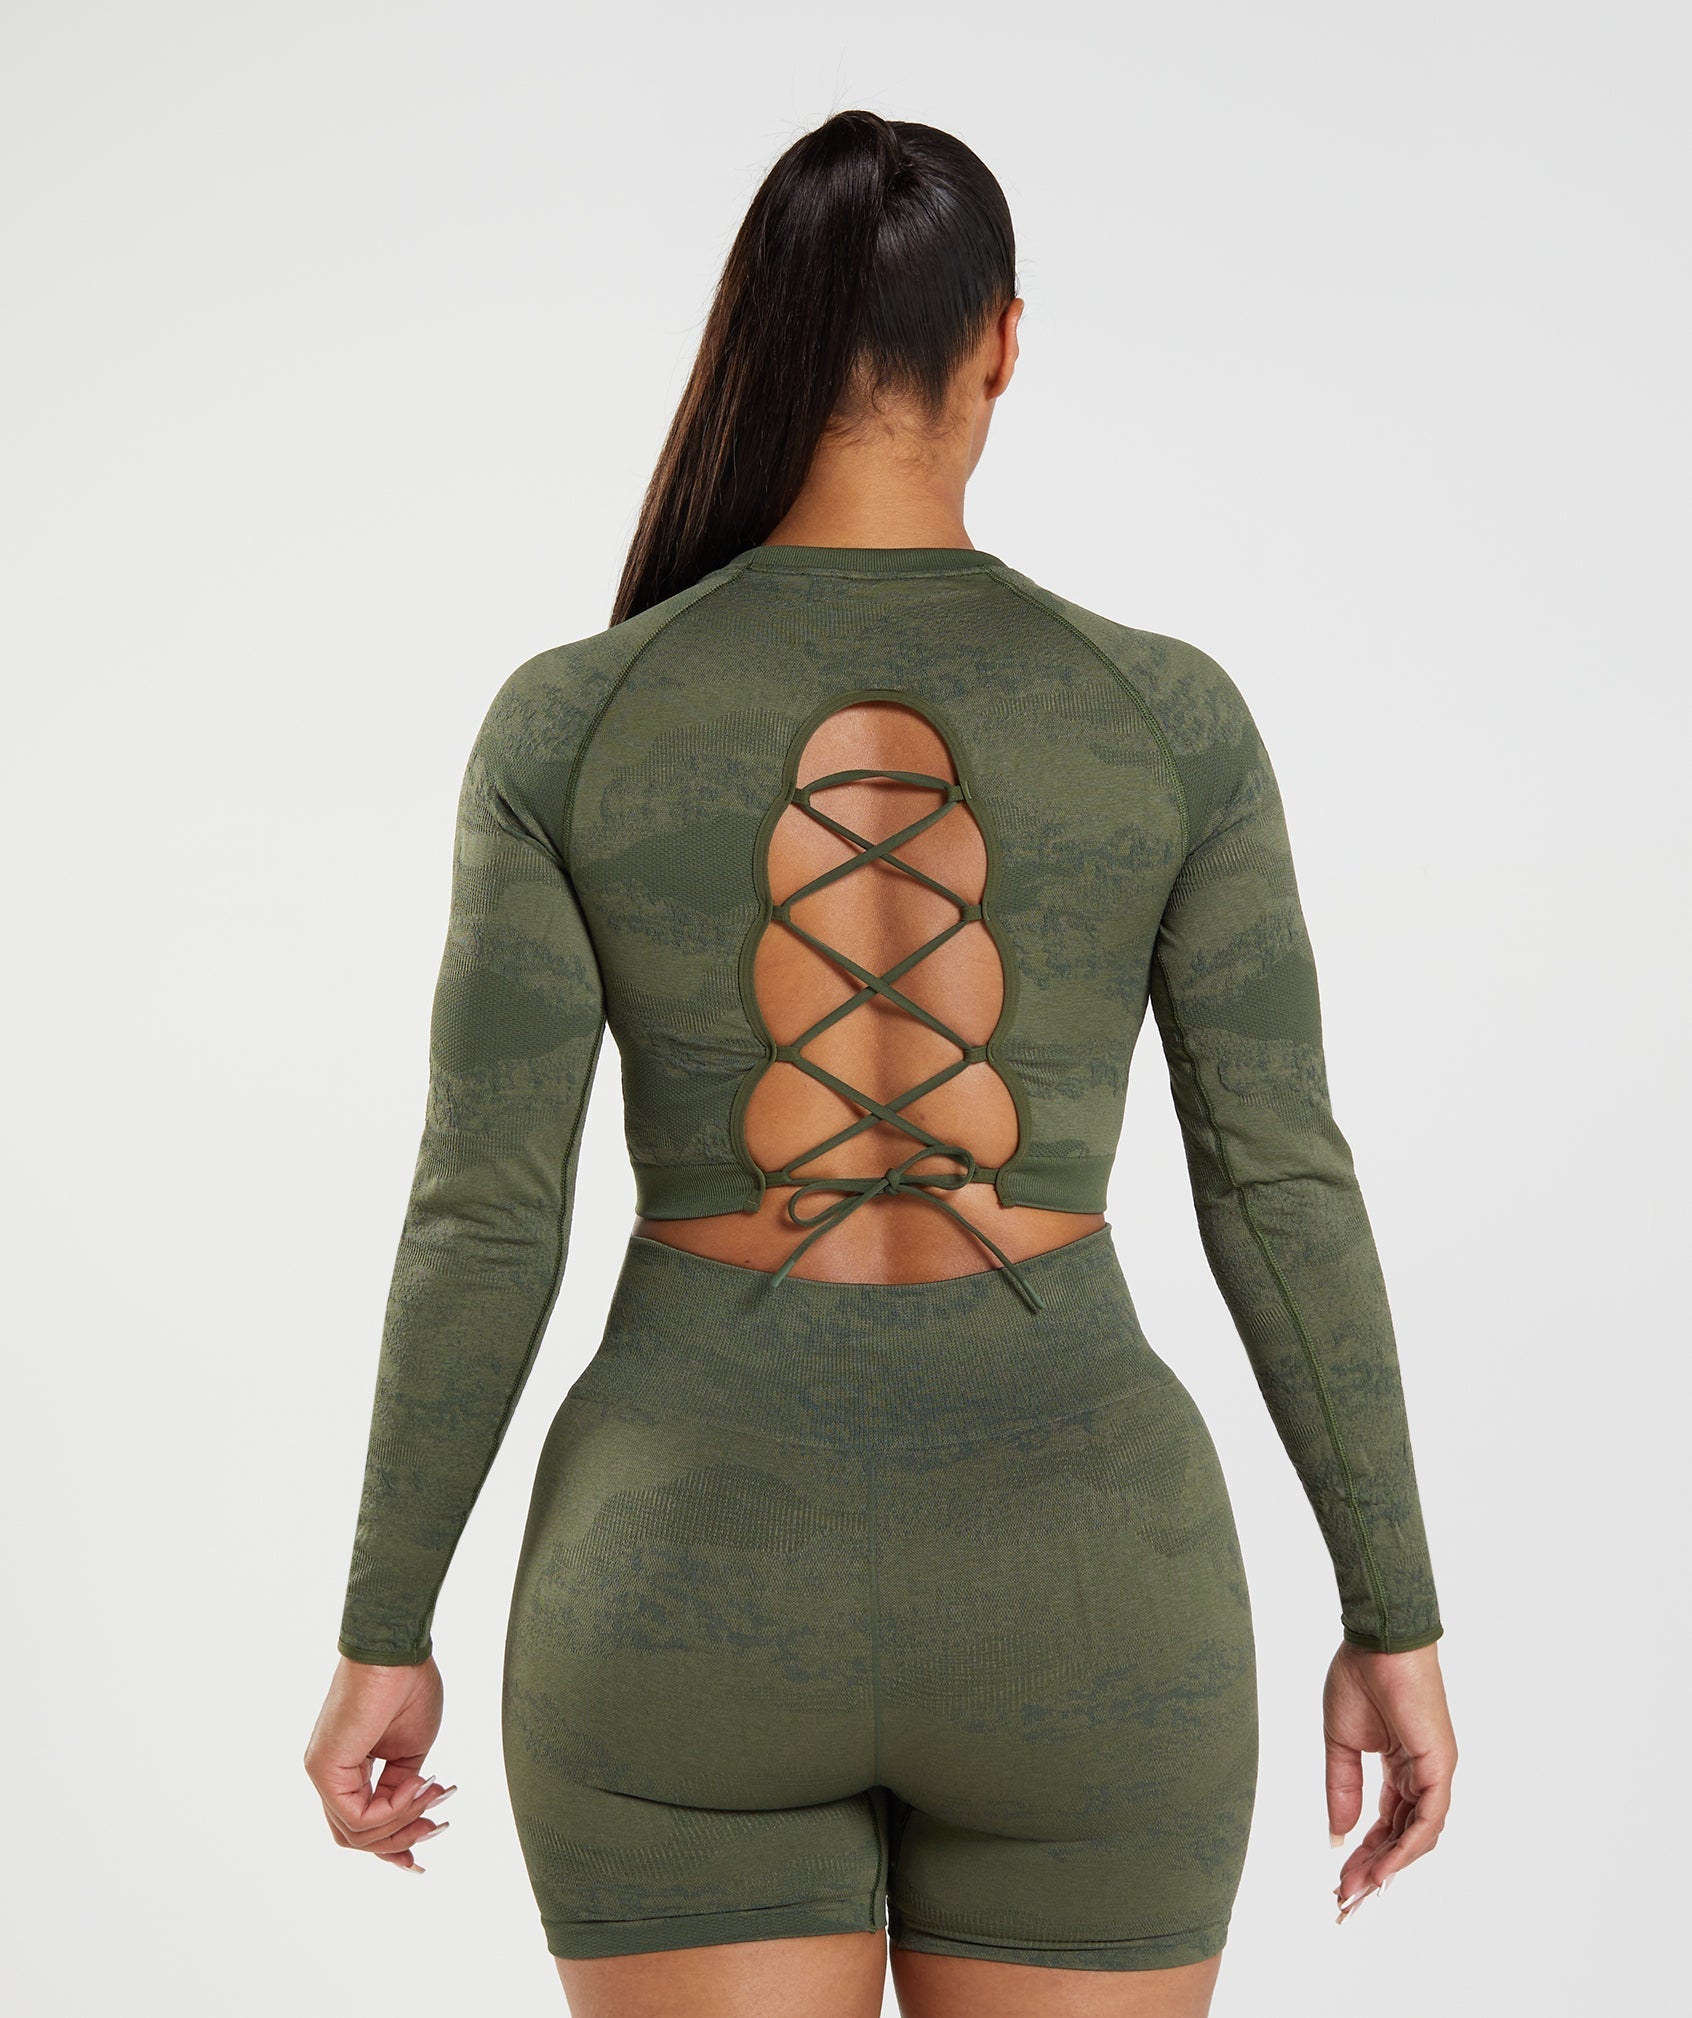 Adapt Camo Seamless Lace Up Back Top in Moss Olive/Core Olive - view 1